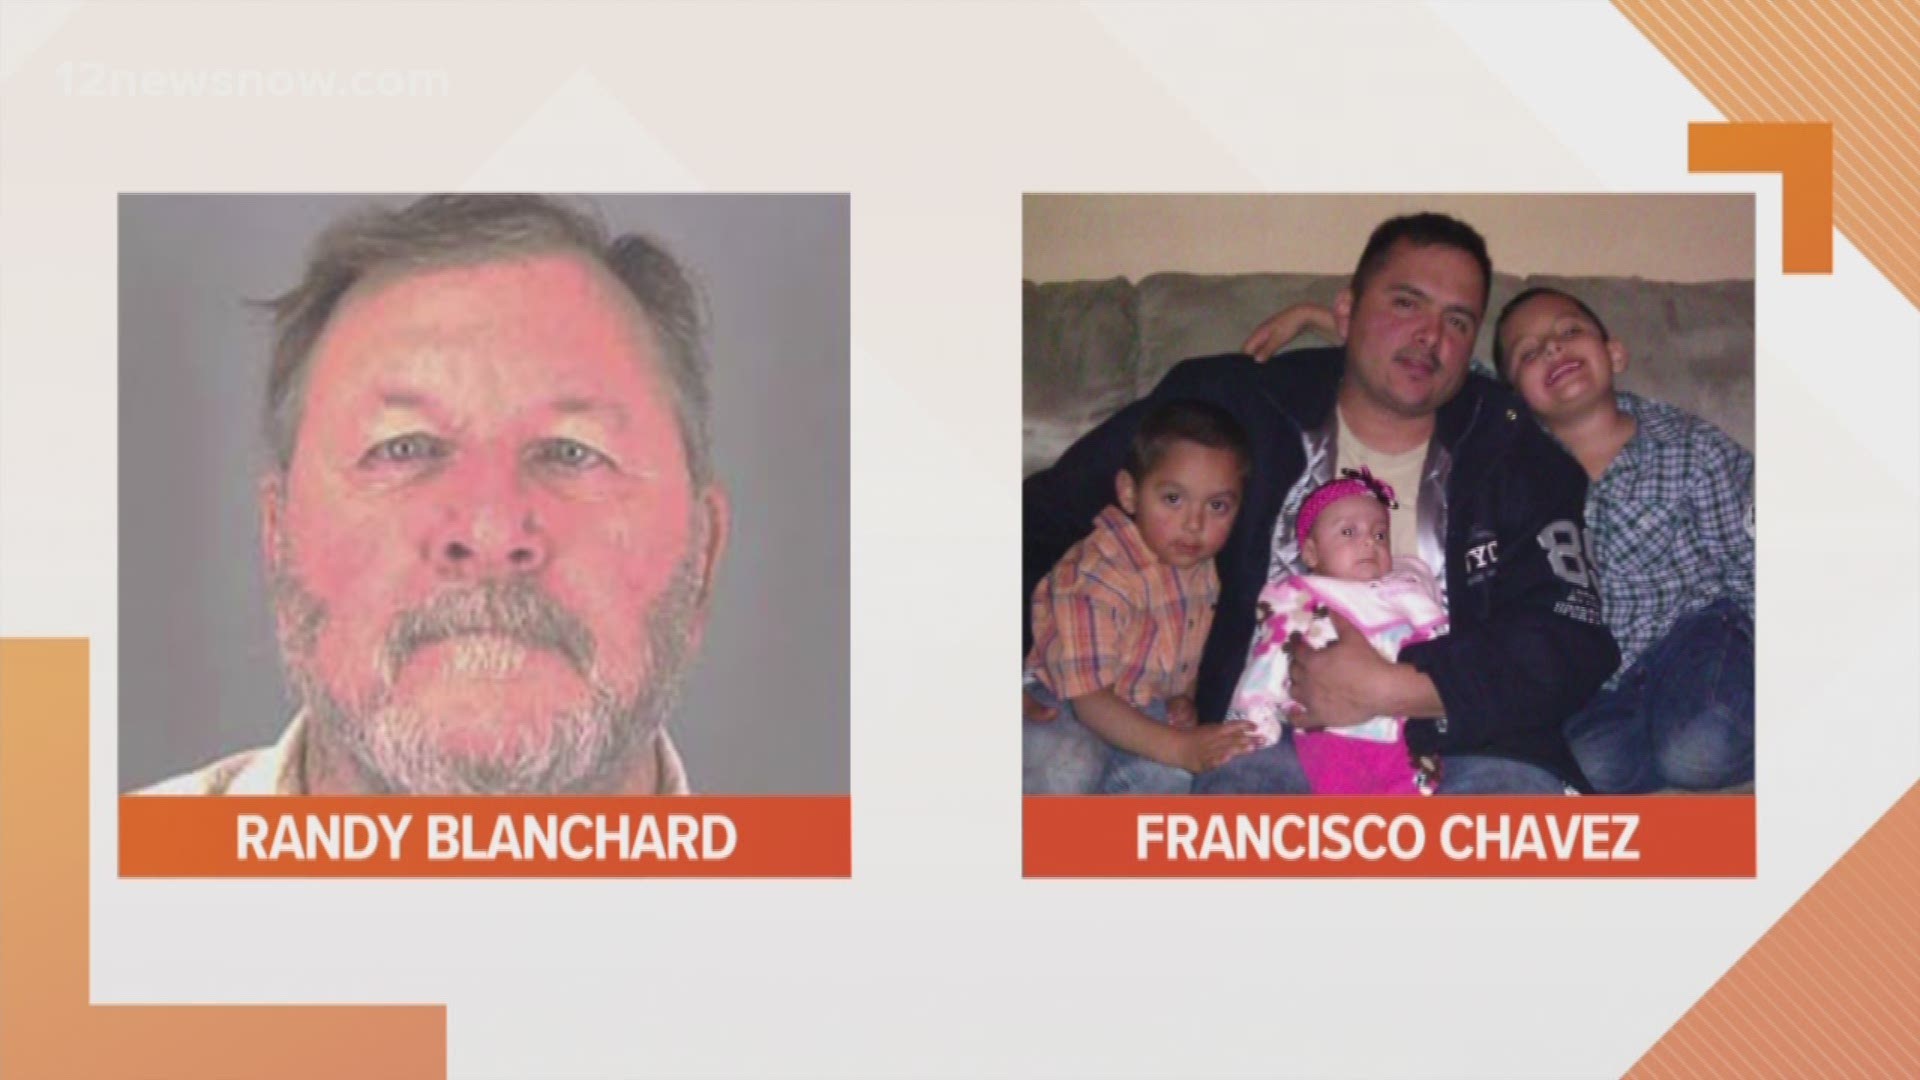 Blanchard expected to plead guilty to negligent homicide 
